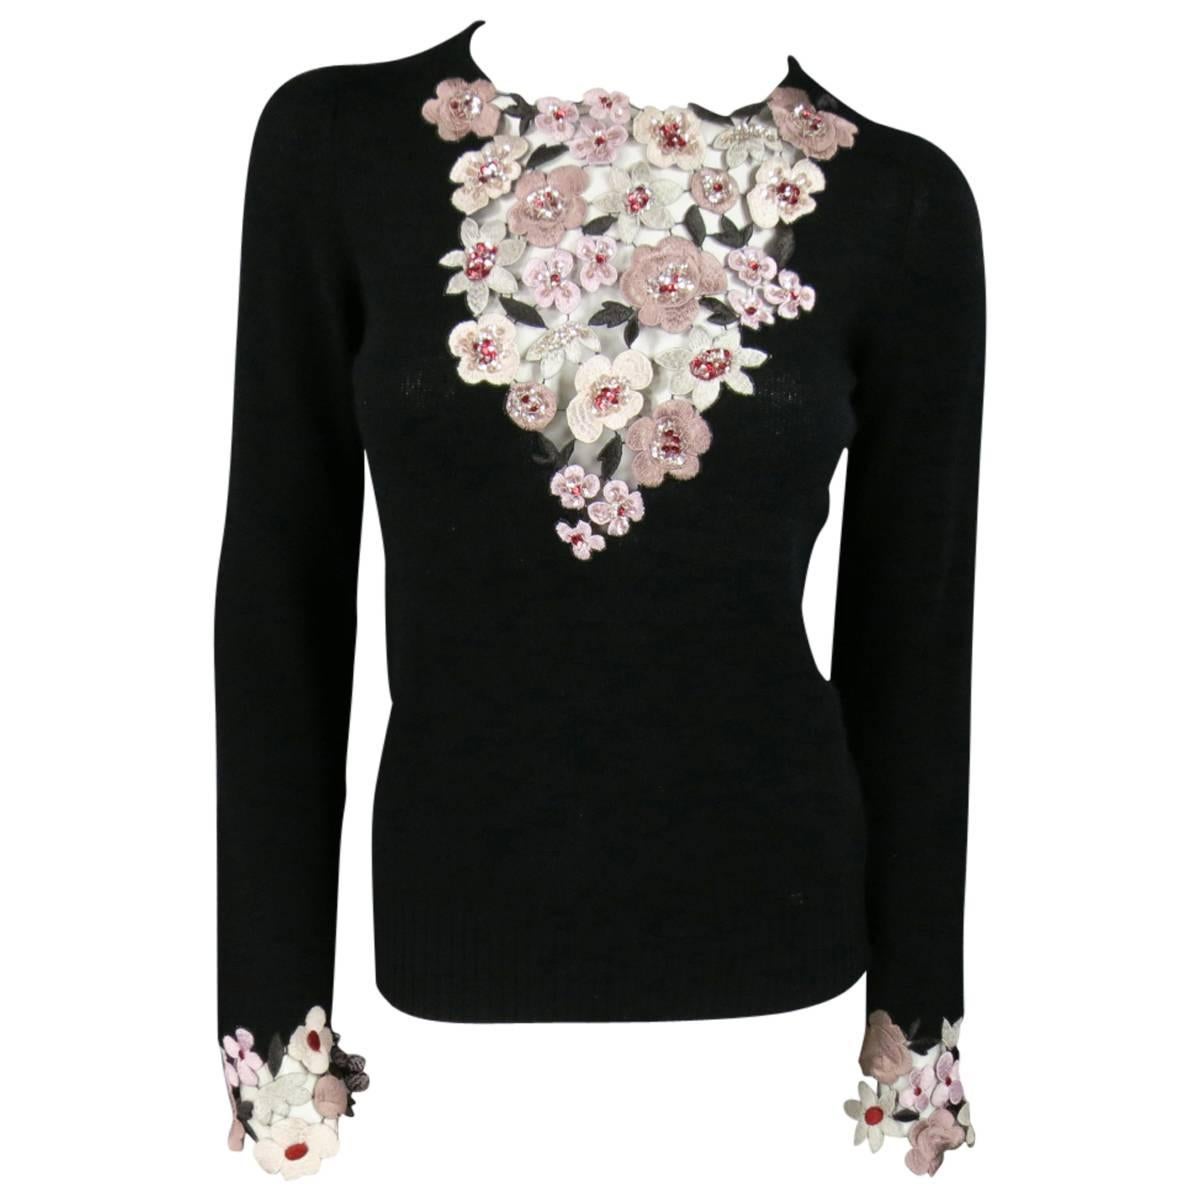 CHANEL Size S Black Cashmere Sequin Embroidered Cutout Floral Sweater